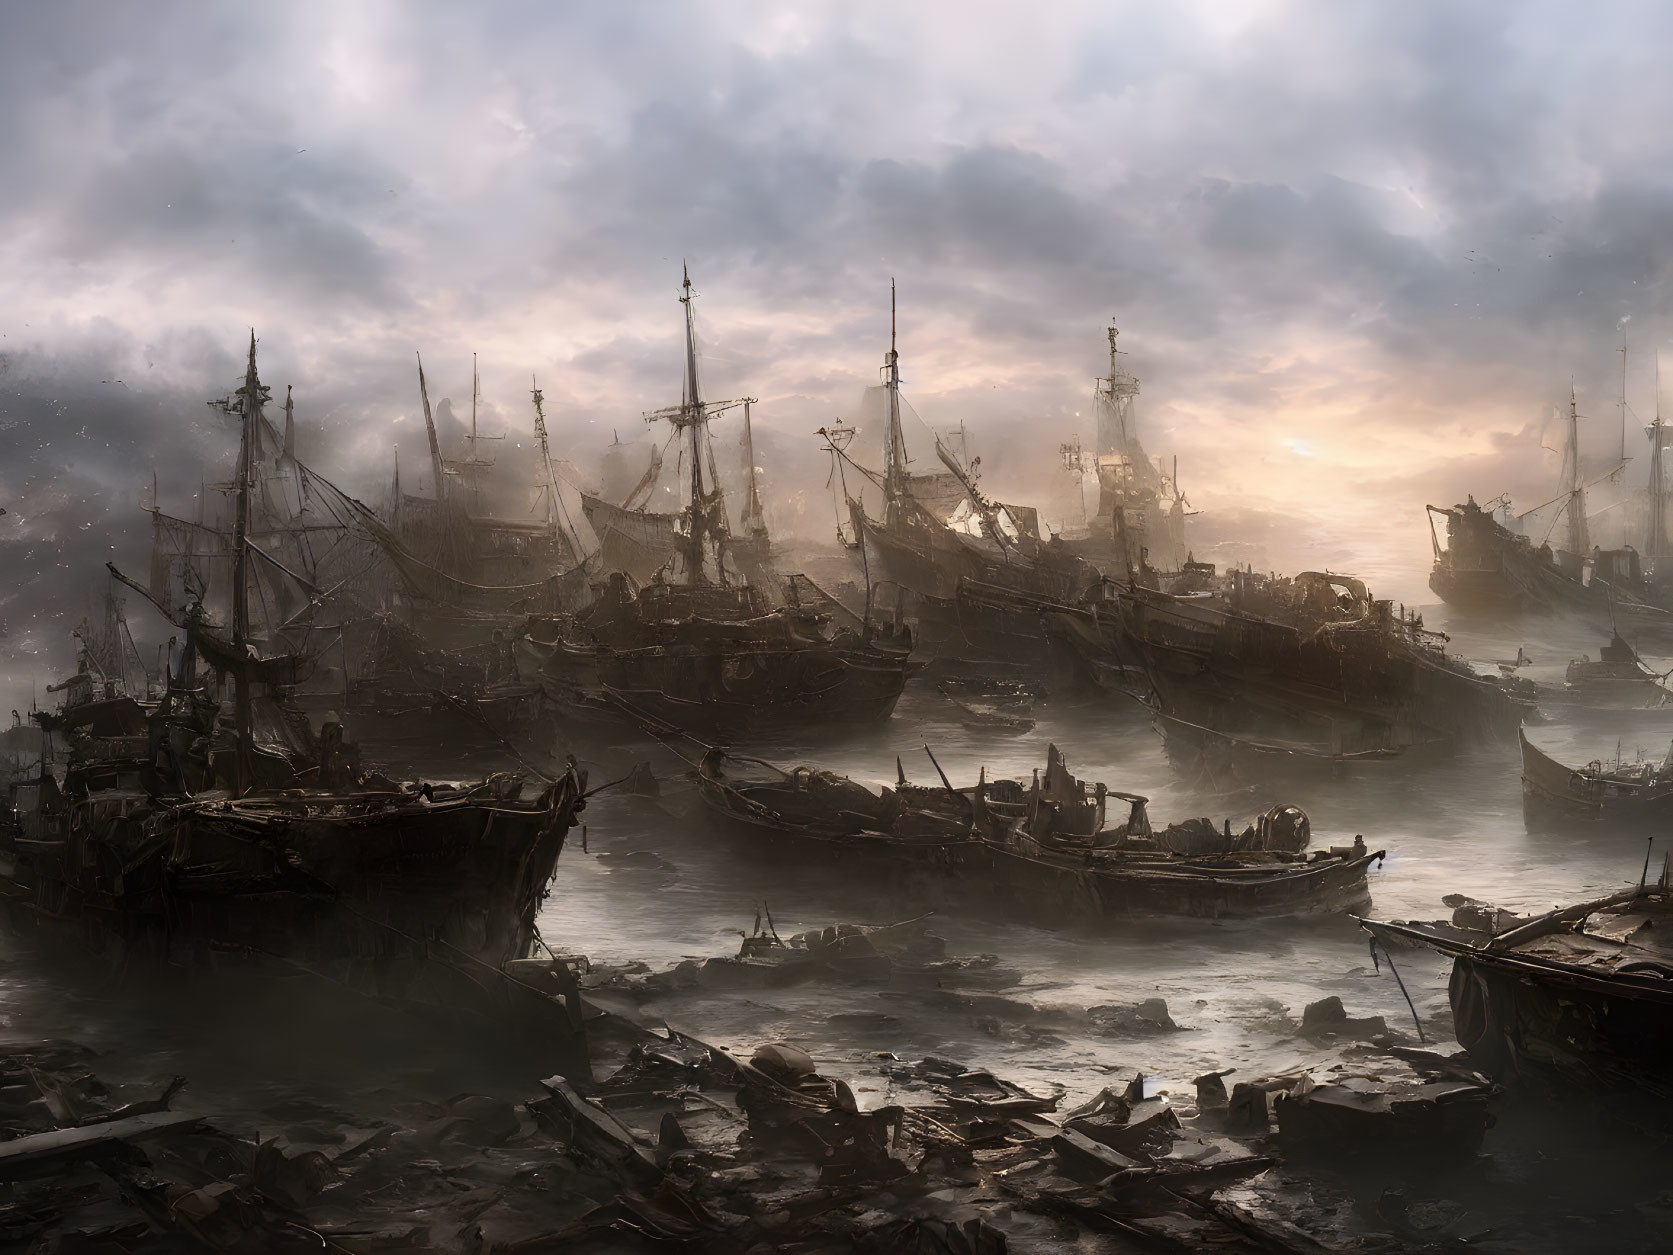 Where ships go to die